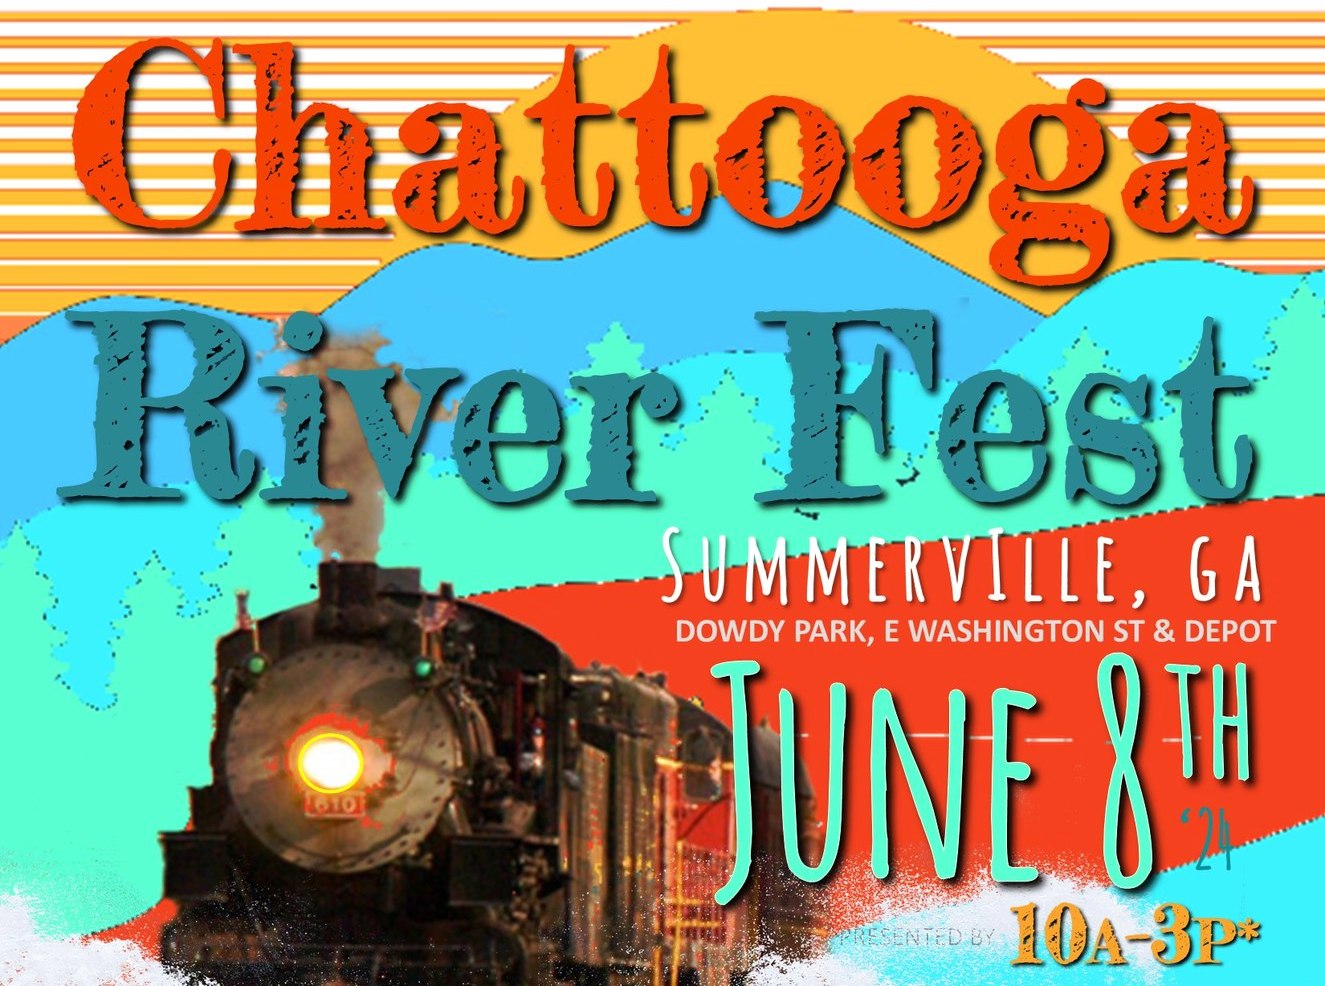 “Chattooga (Georgia) Riverfest Event Coming Soon – Fun for Everyone